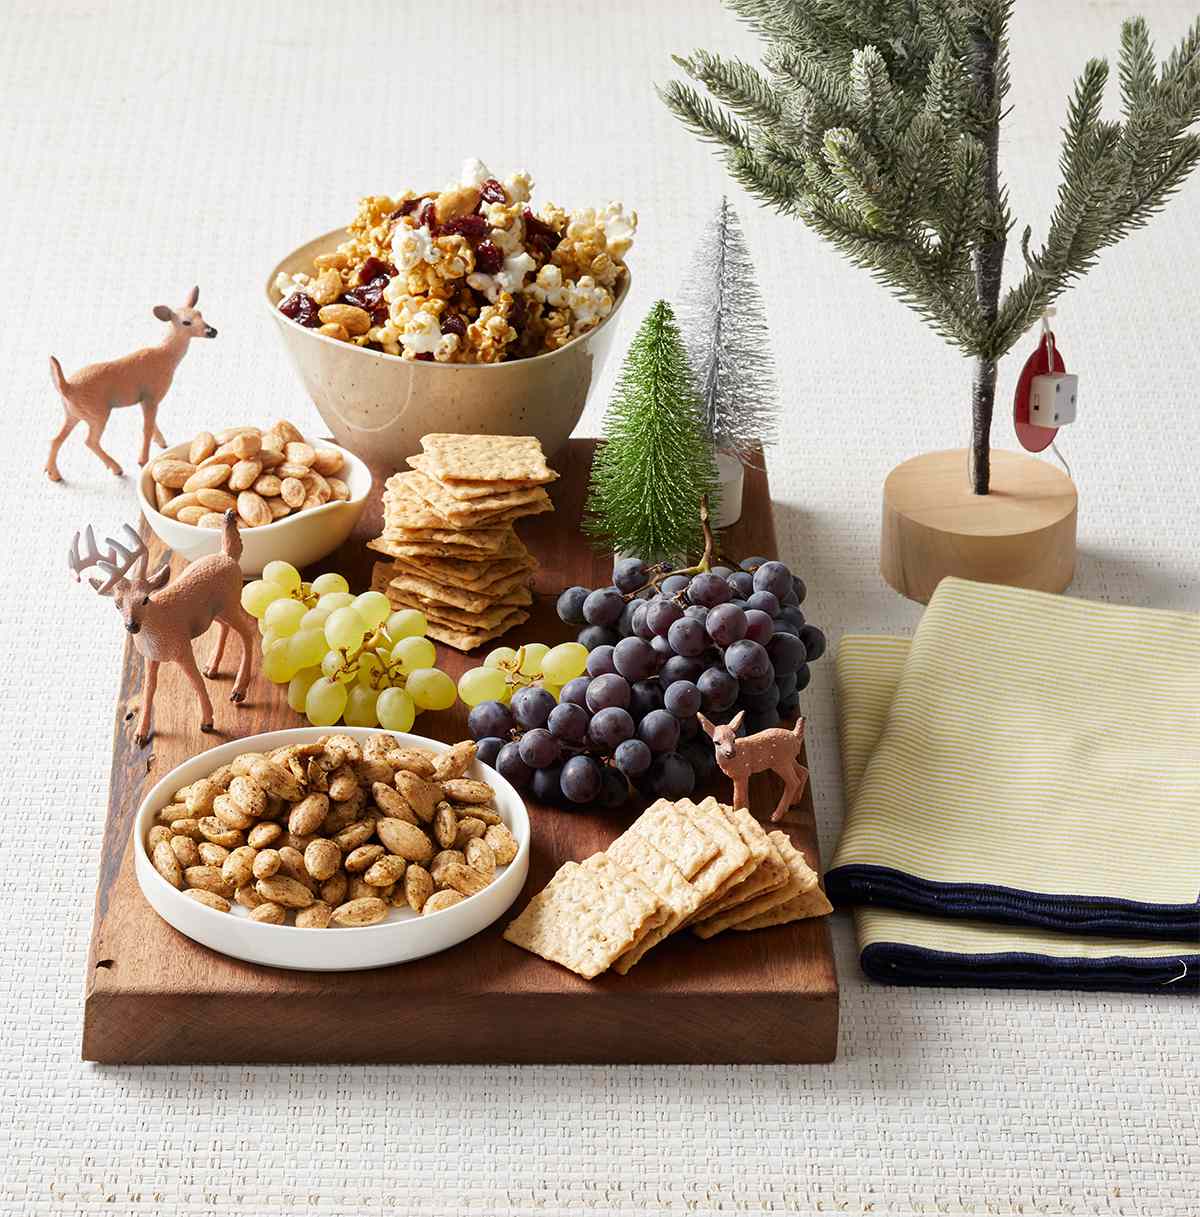 wooden board with grapes crackers snack mix and deer figures and trees